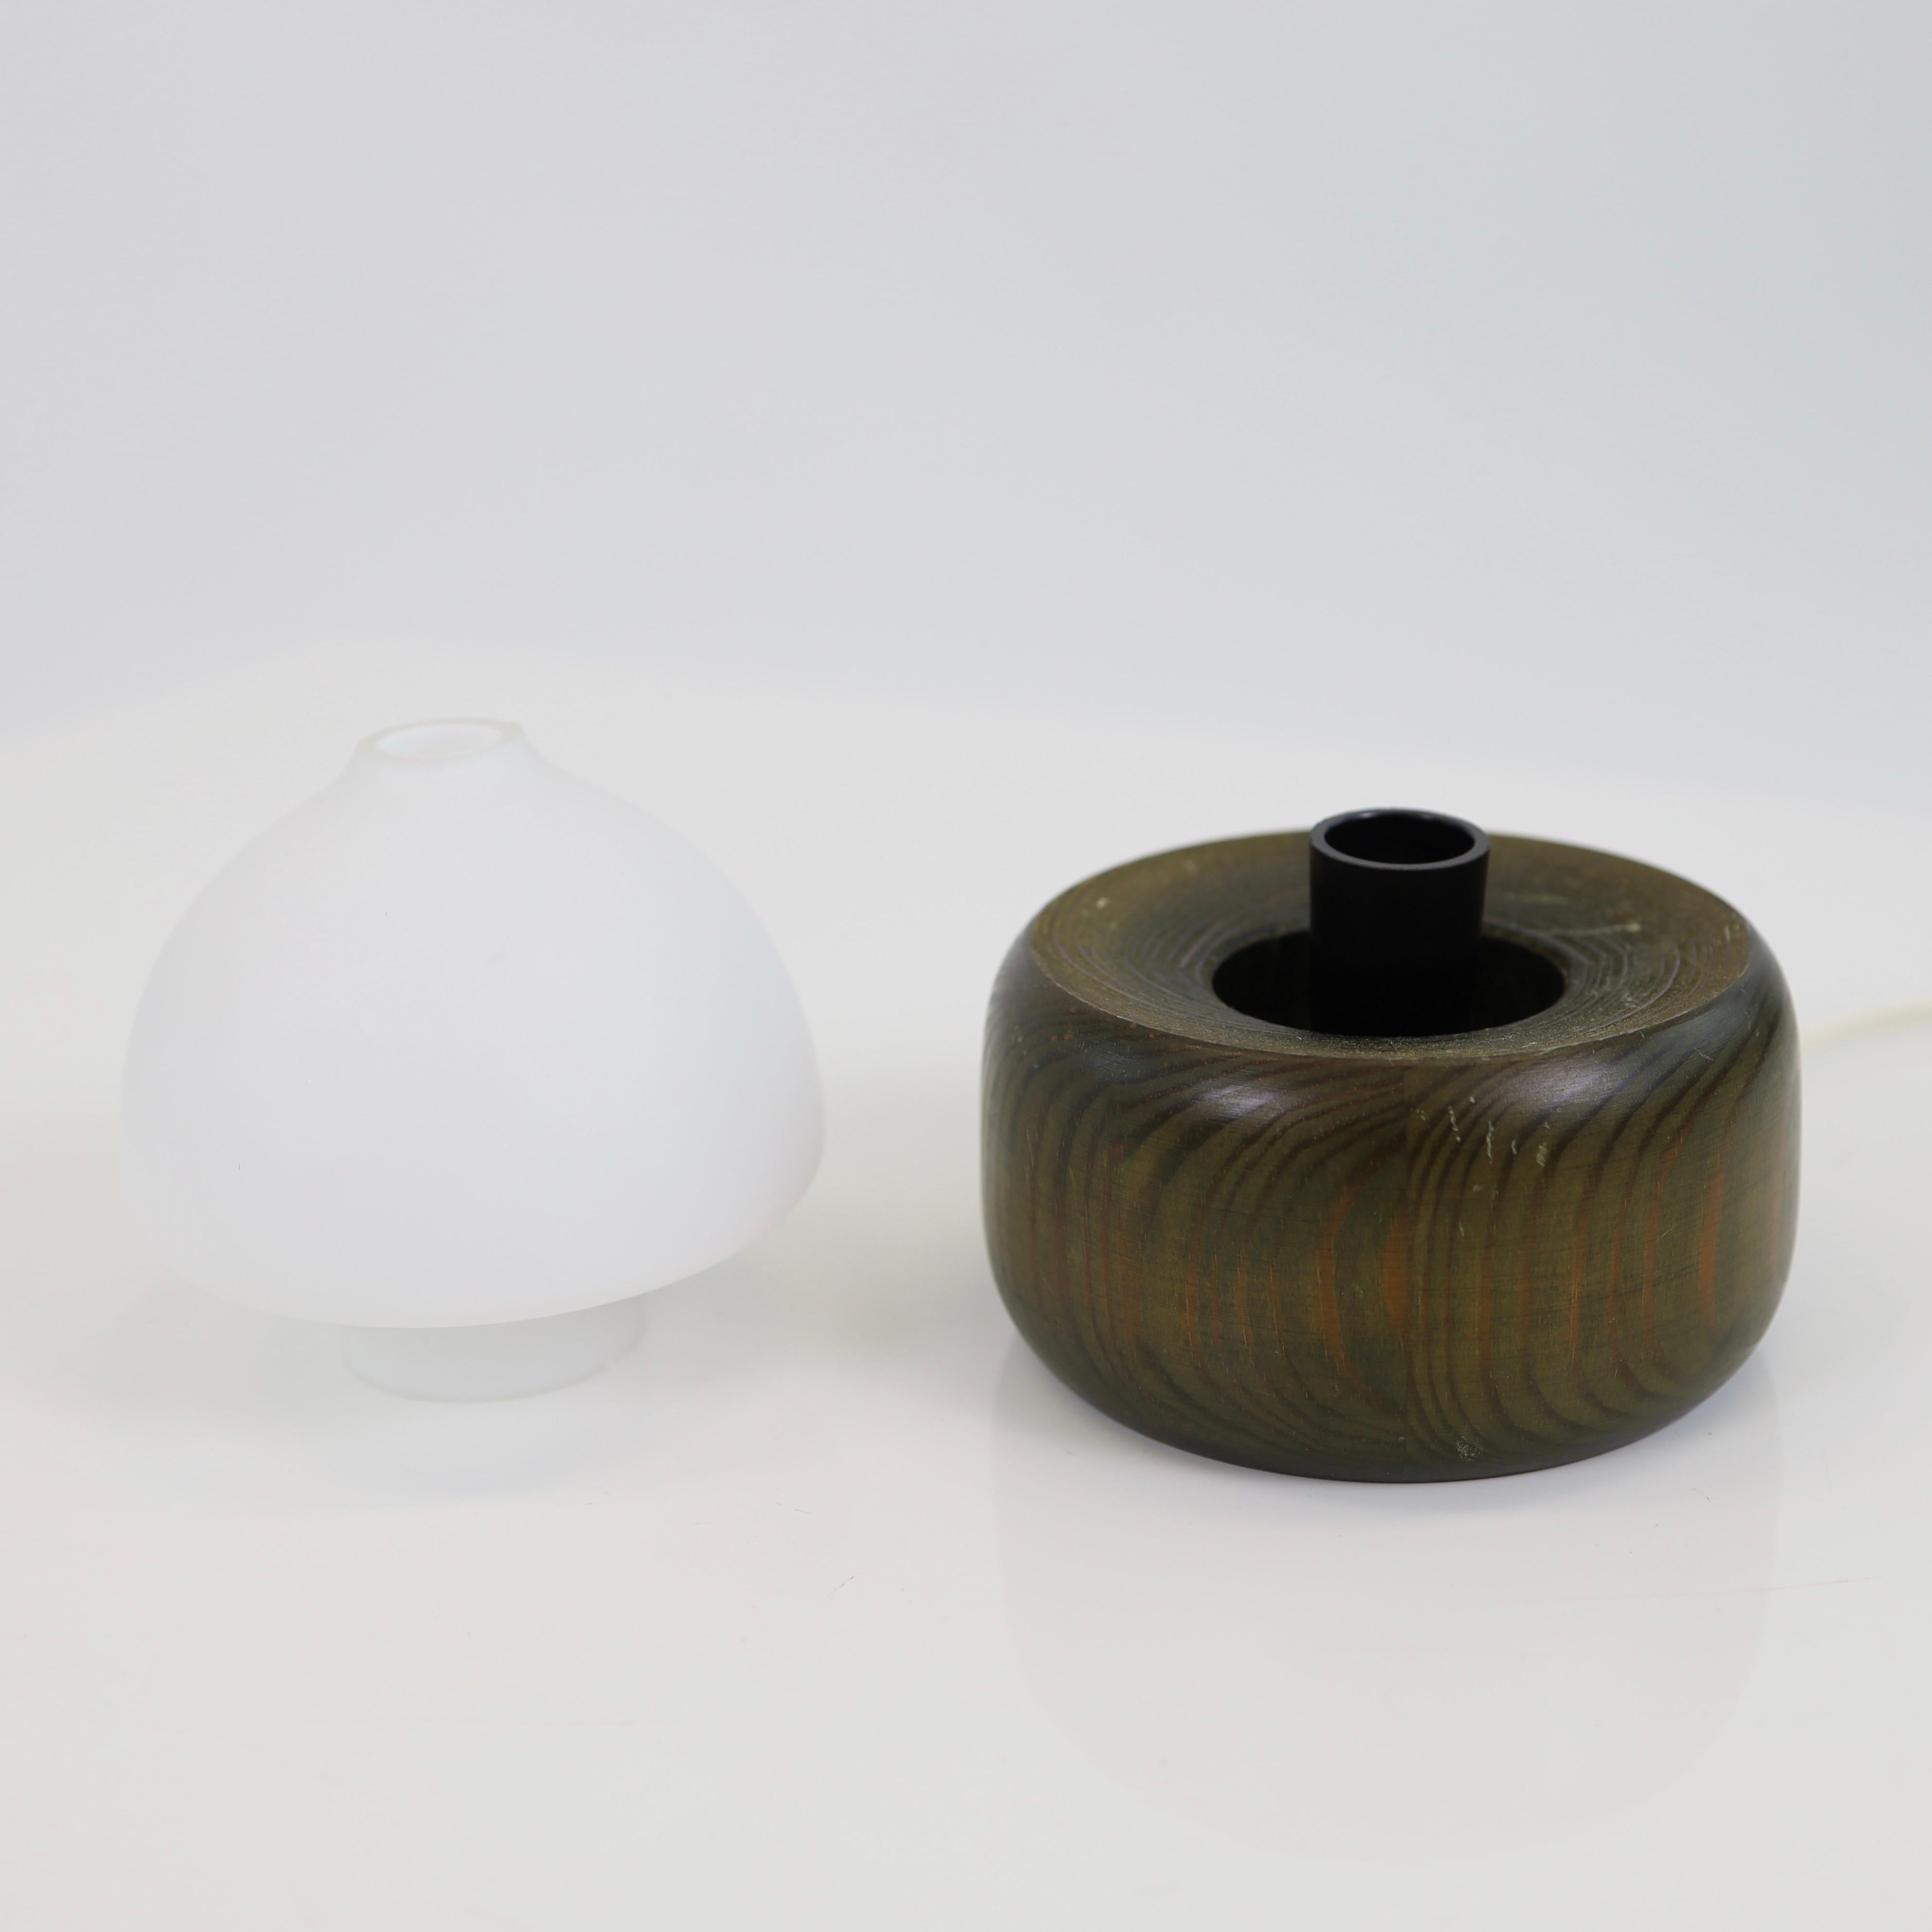 Set of Swedish Pine Wood Night Lamps by Aneta, Sweden, 1970s For Sale 1